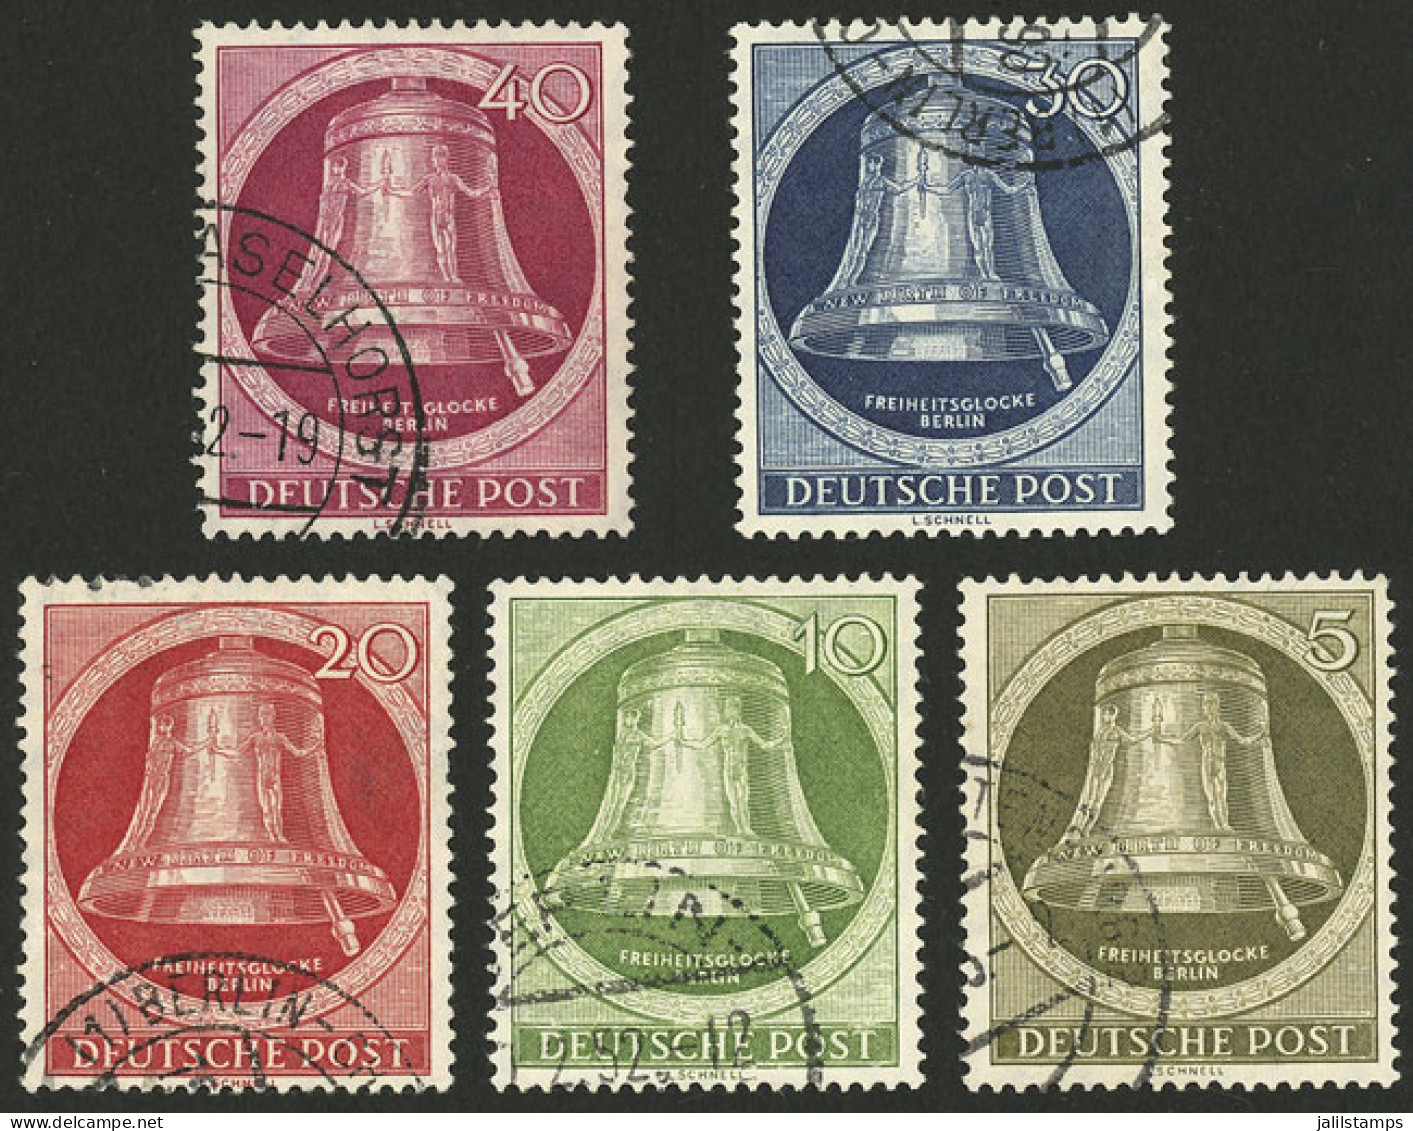 WEST GERMANY - BERLIN: Yvert 68/72, 1952 Bell With Clapper At Right, Set Of 5 Used Values, VF Quality! - Used Stamps